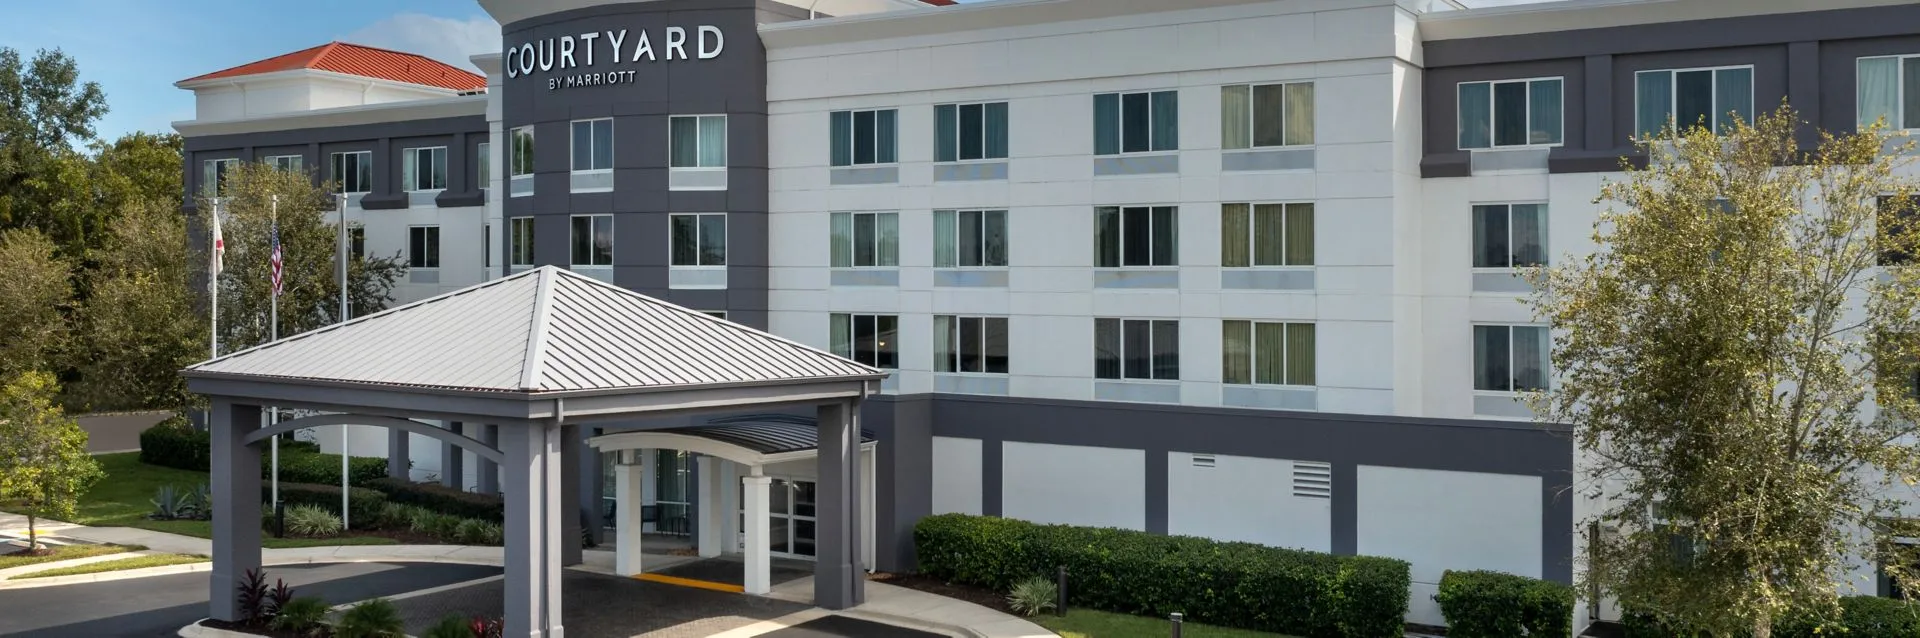 Courtyard by Marriott Jacksonville Flagler Center hotel exterior with landscaping